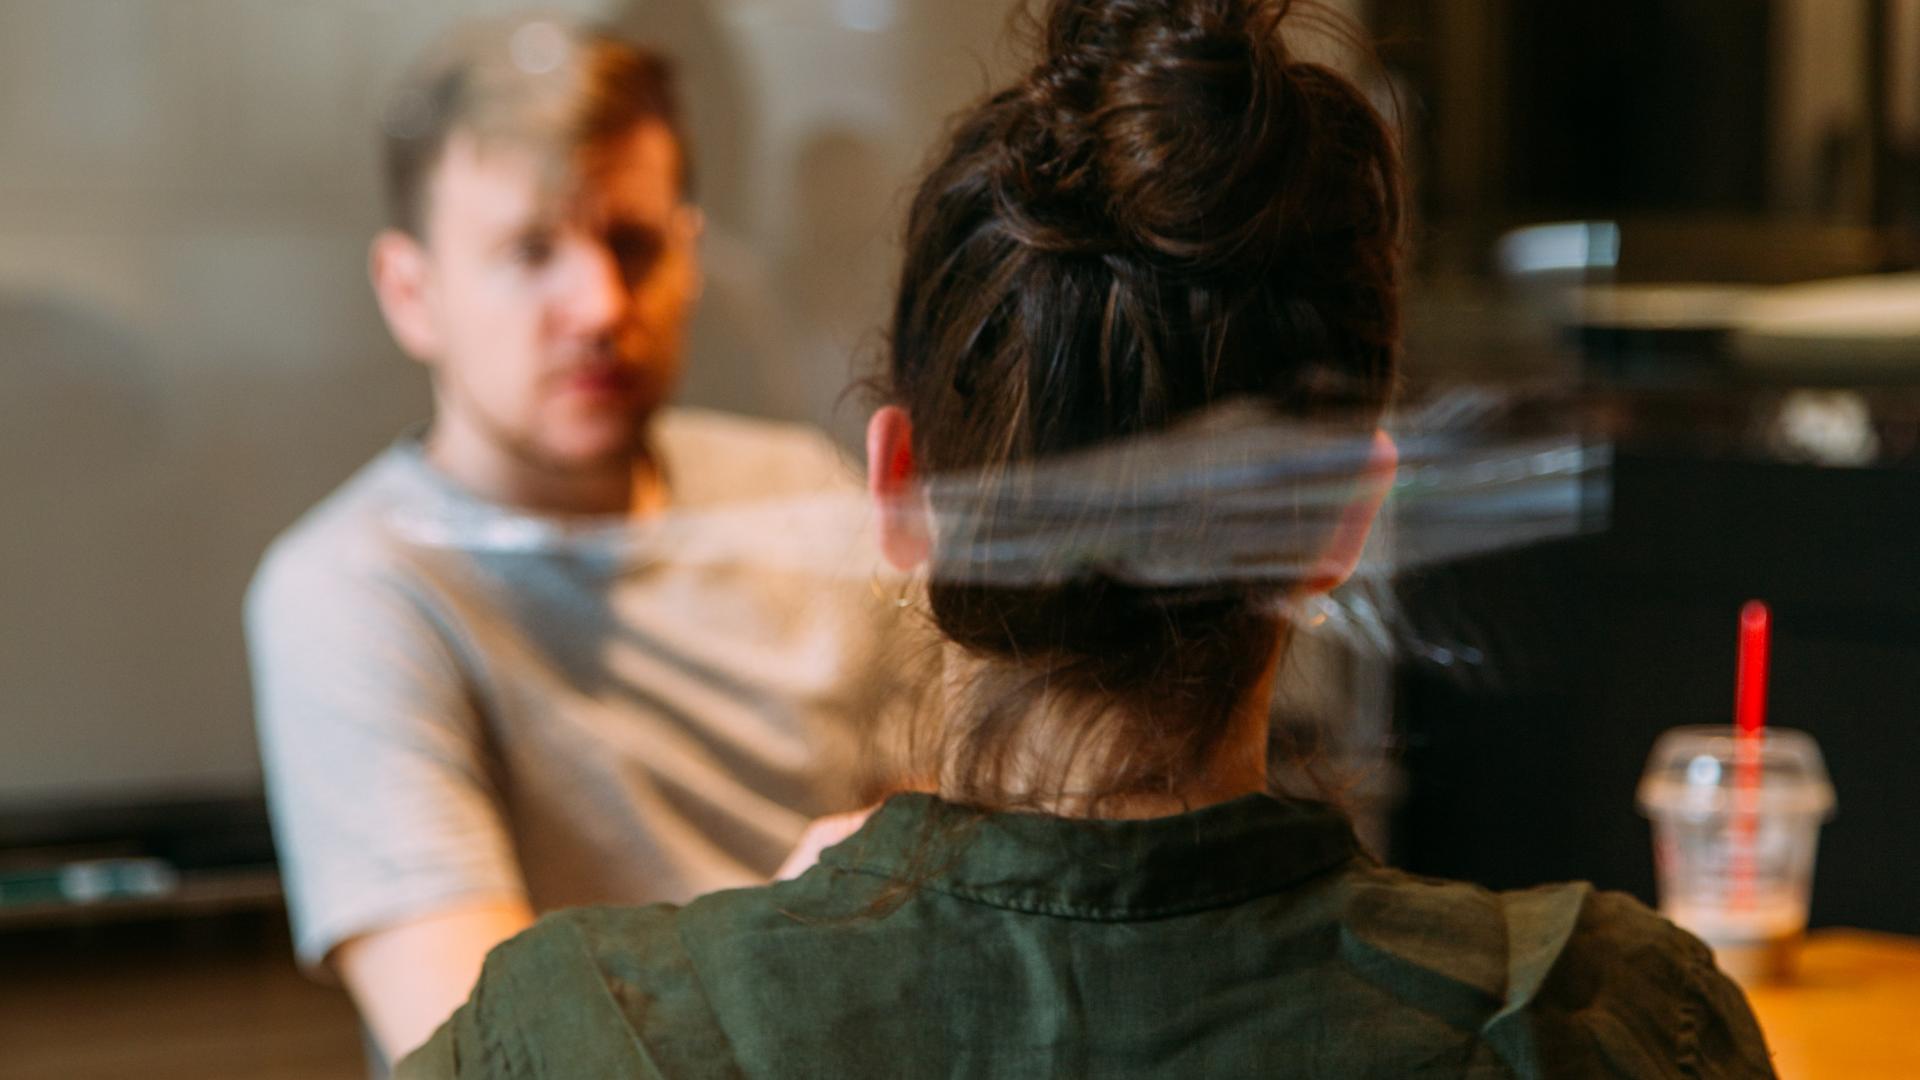 Image of people talking behind a glass screen